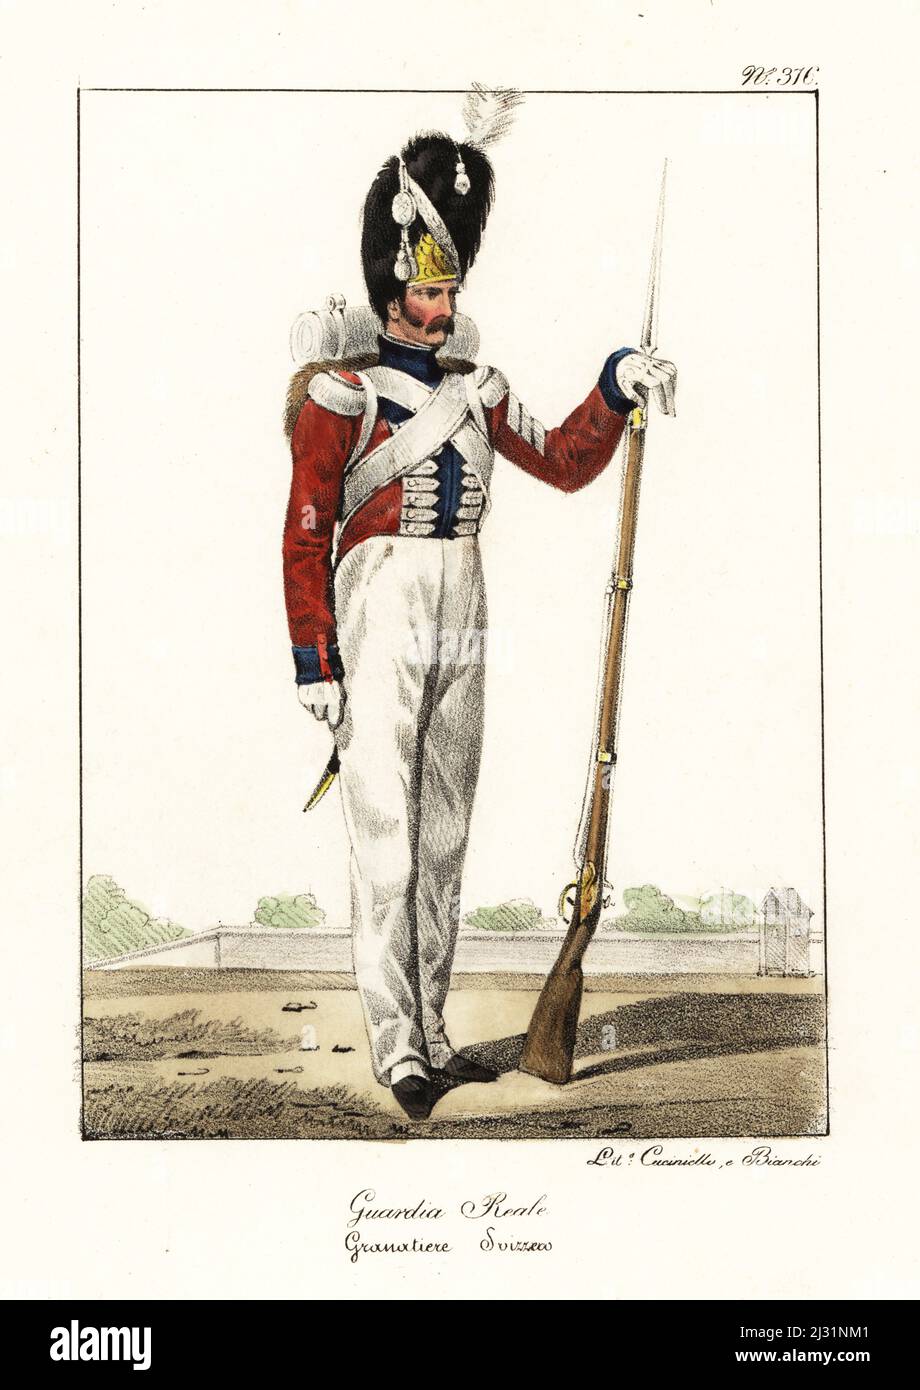 Grenadier in the Swiss Guard, French Royal Guard, Bourbon Restoration. In bearskin with brush, red coat with frogging and epaulettes, white pantalons, armed with musket and bayonet. Garde Royale. Grenadier Suisse. Handcoloured lithograph by Lorenzo Bianchi and Domenico Cuciniello after Hippolyte Lecomte from Costumi civili e militari della monarchia francese dal 1200 al 1820, Naples, 1825. Italian edition of Lecomte’s Civilian and military costumes of the French monarchy from 1200 to 1820. Stock Photo